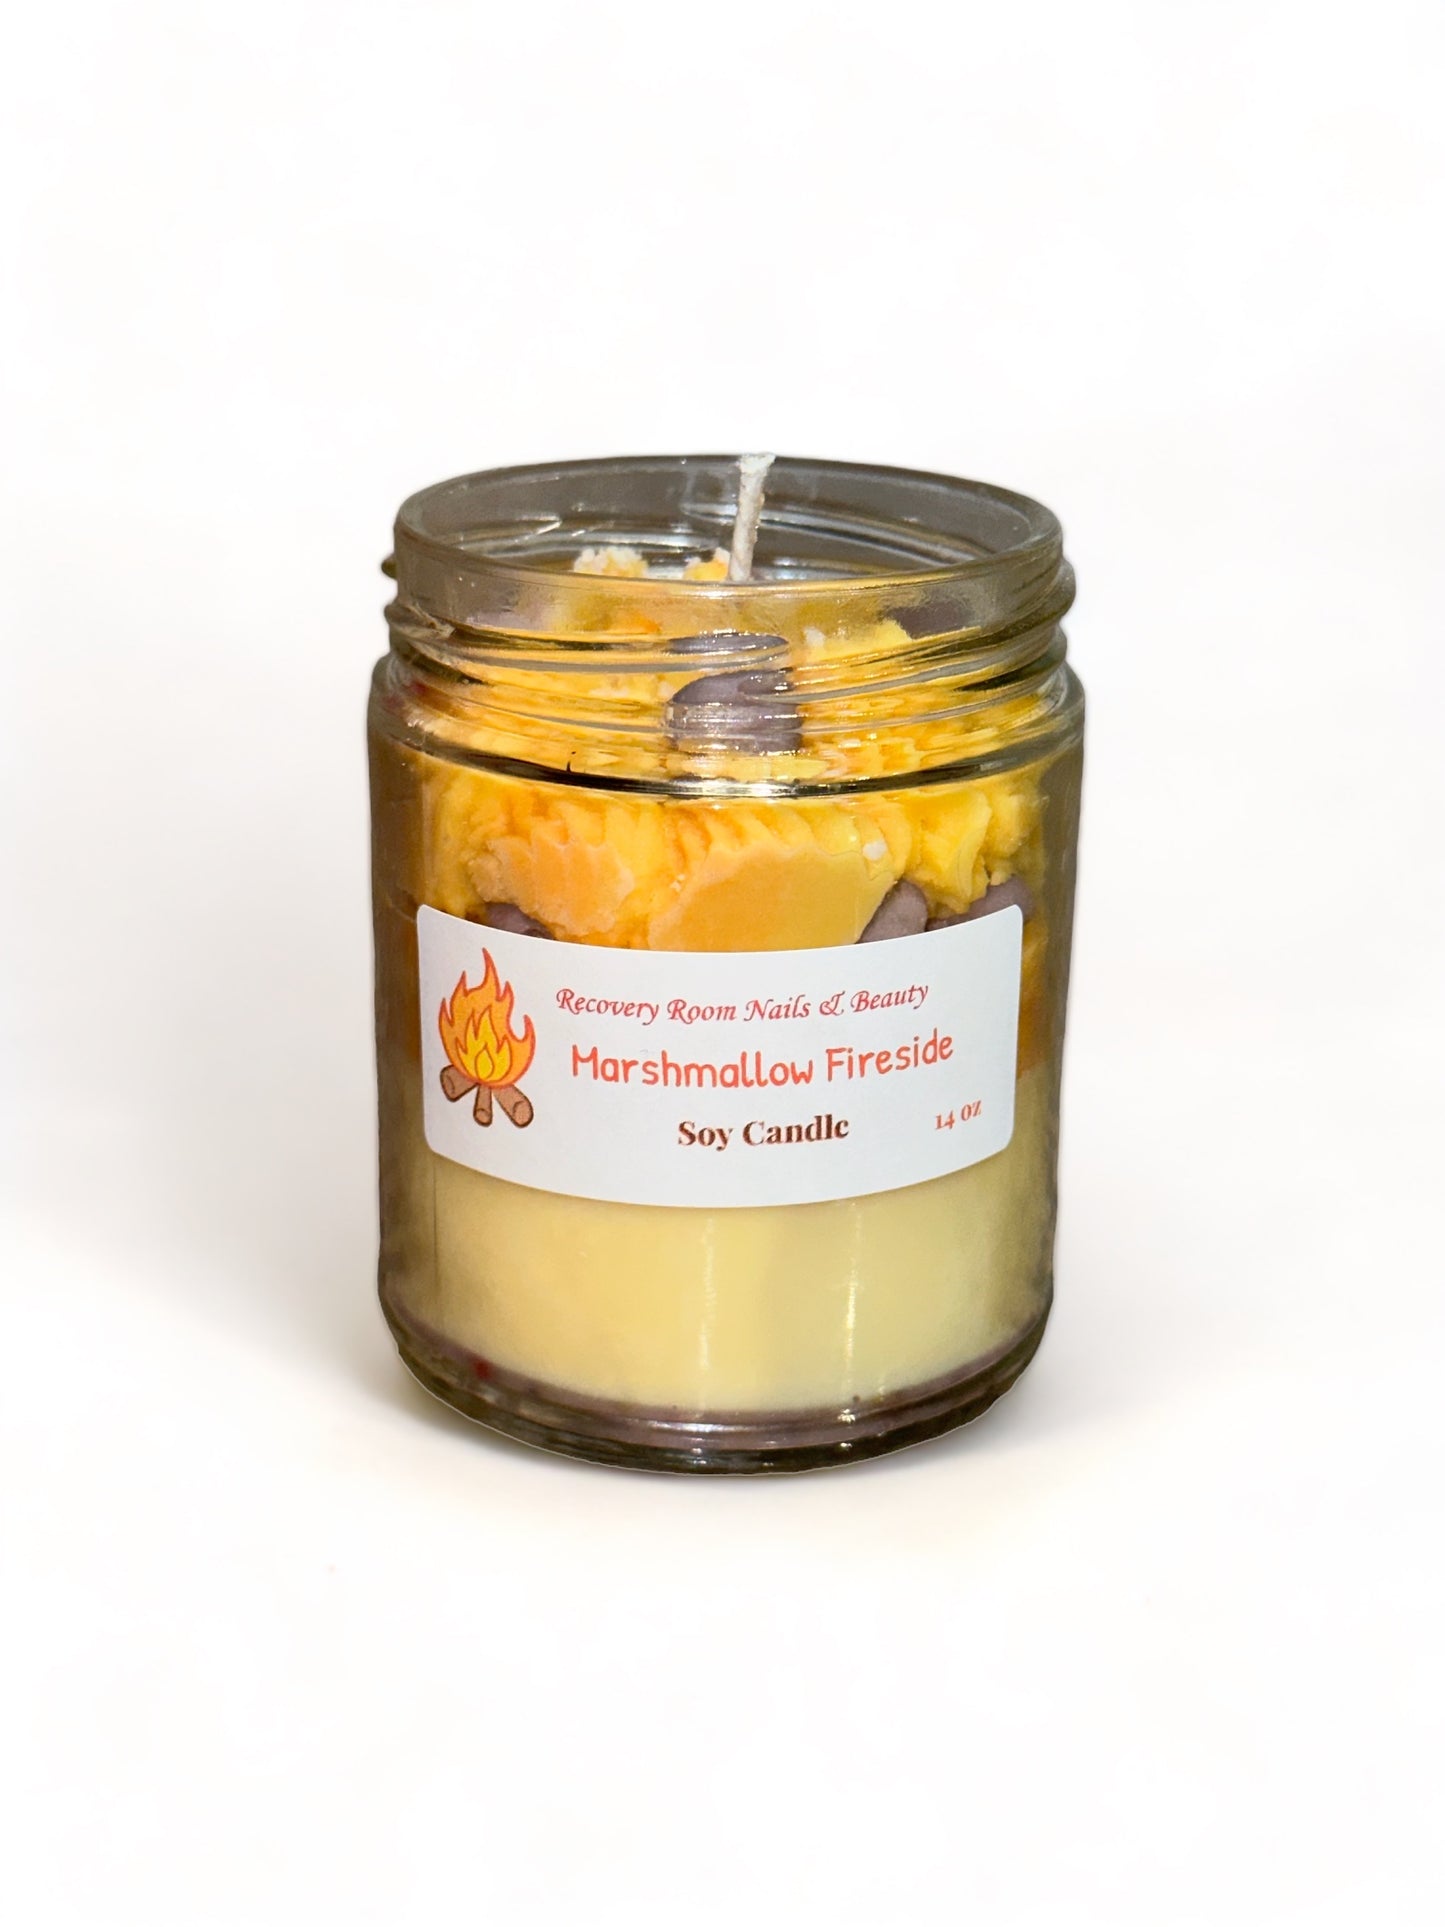 Fireside Marshmallow Candle